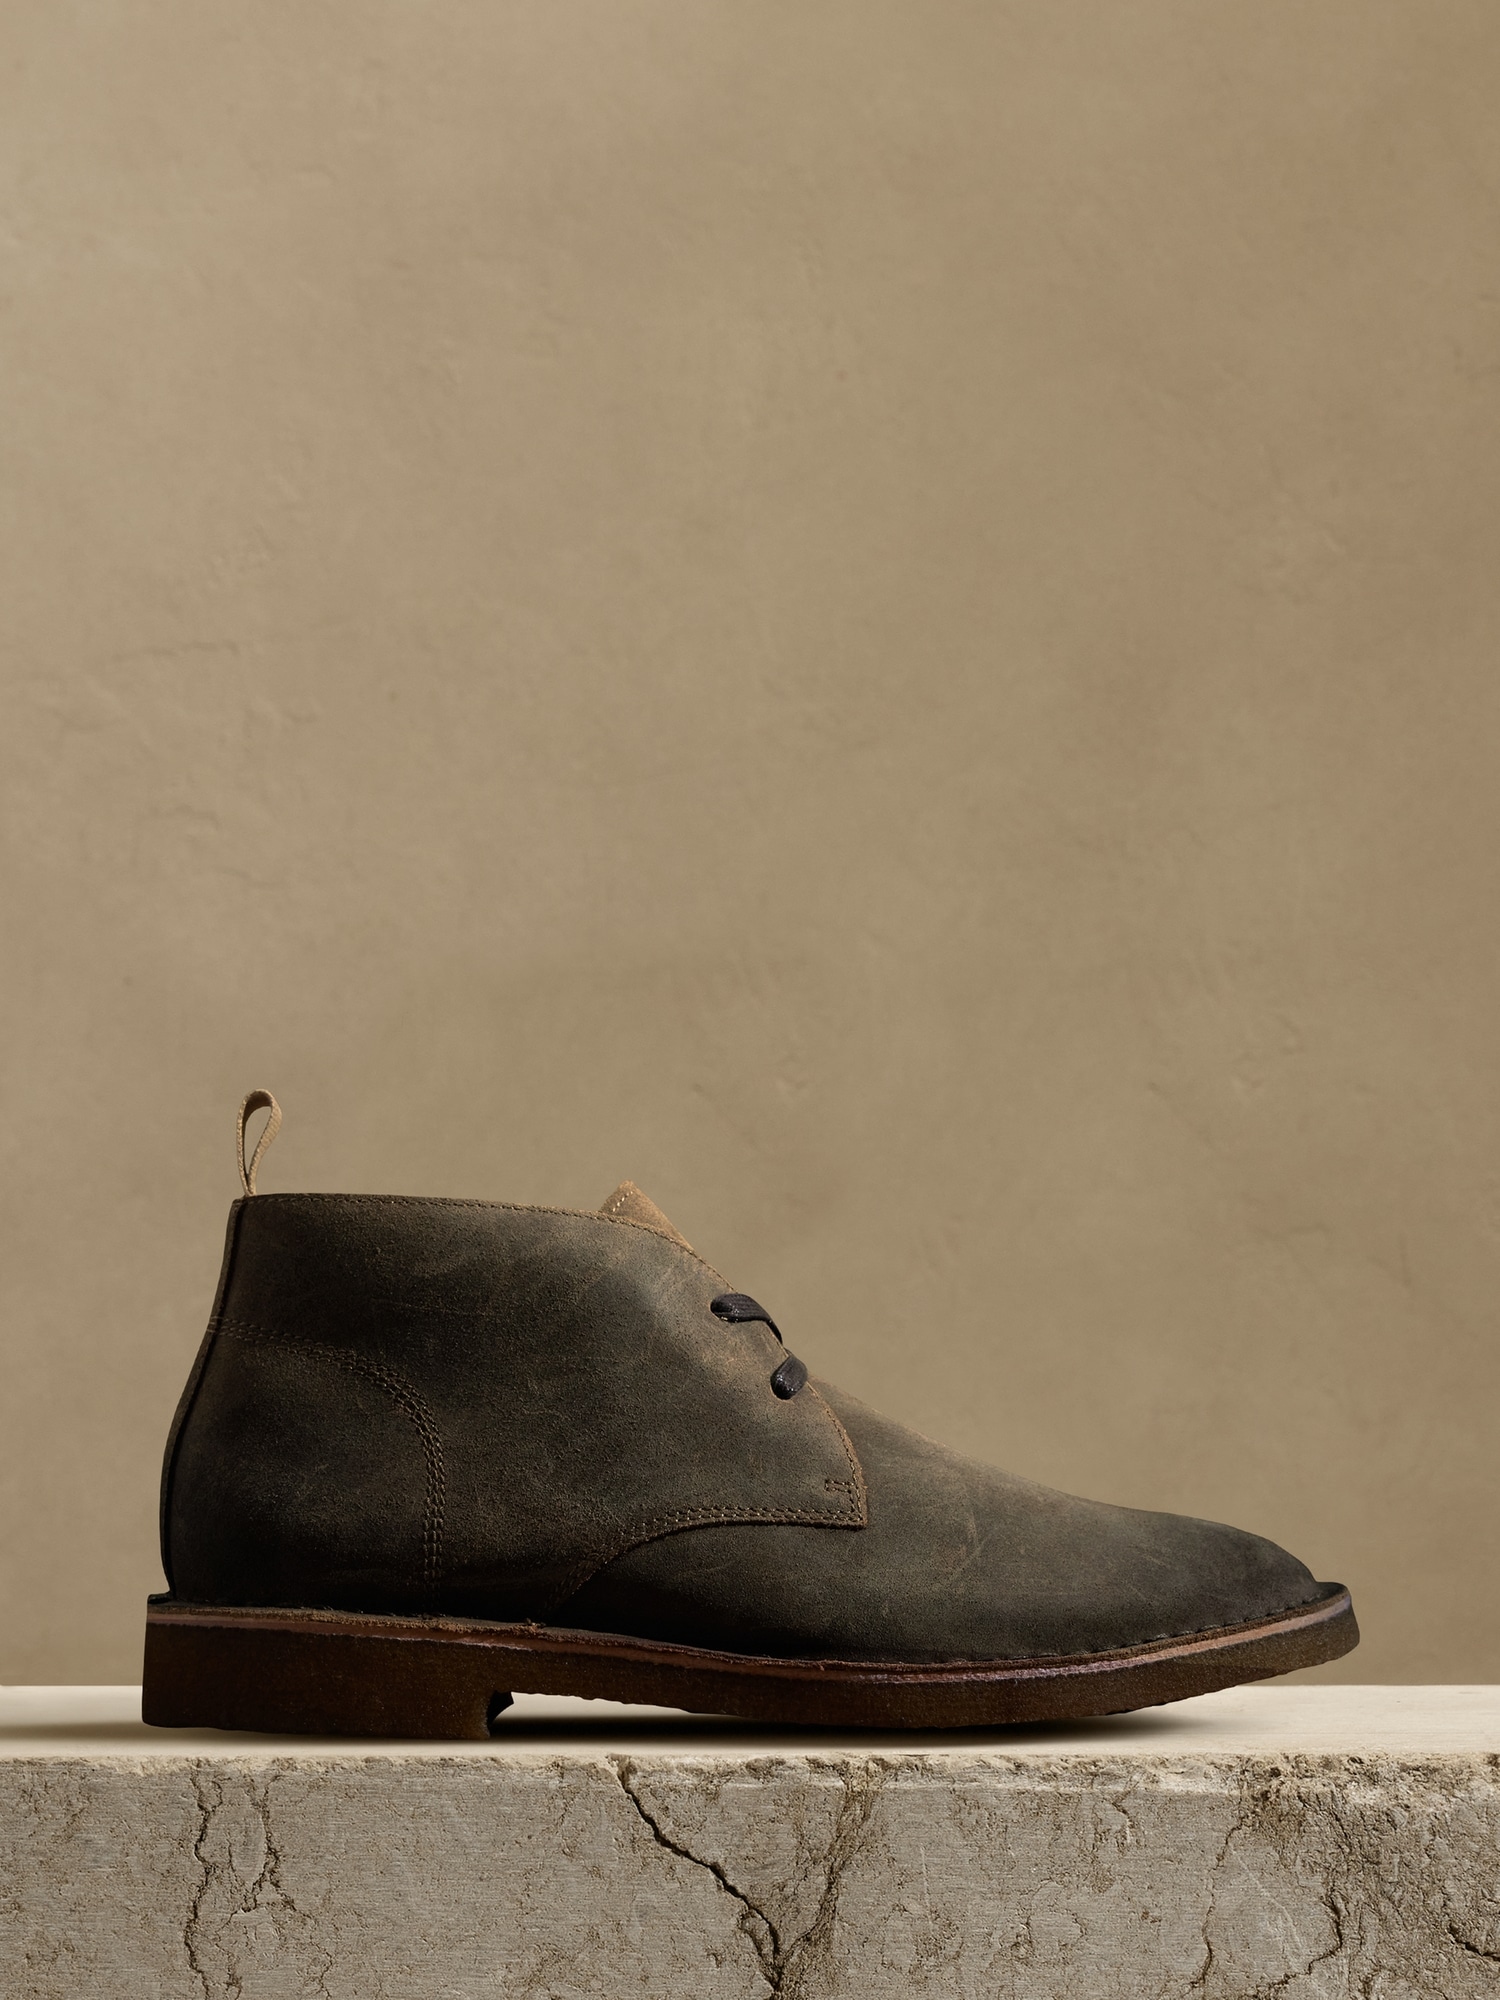 Banana Republic Brendt Leather Chukka Boot with Crepe Sole brown. 1